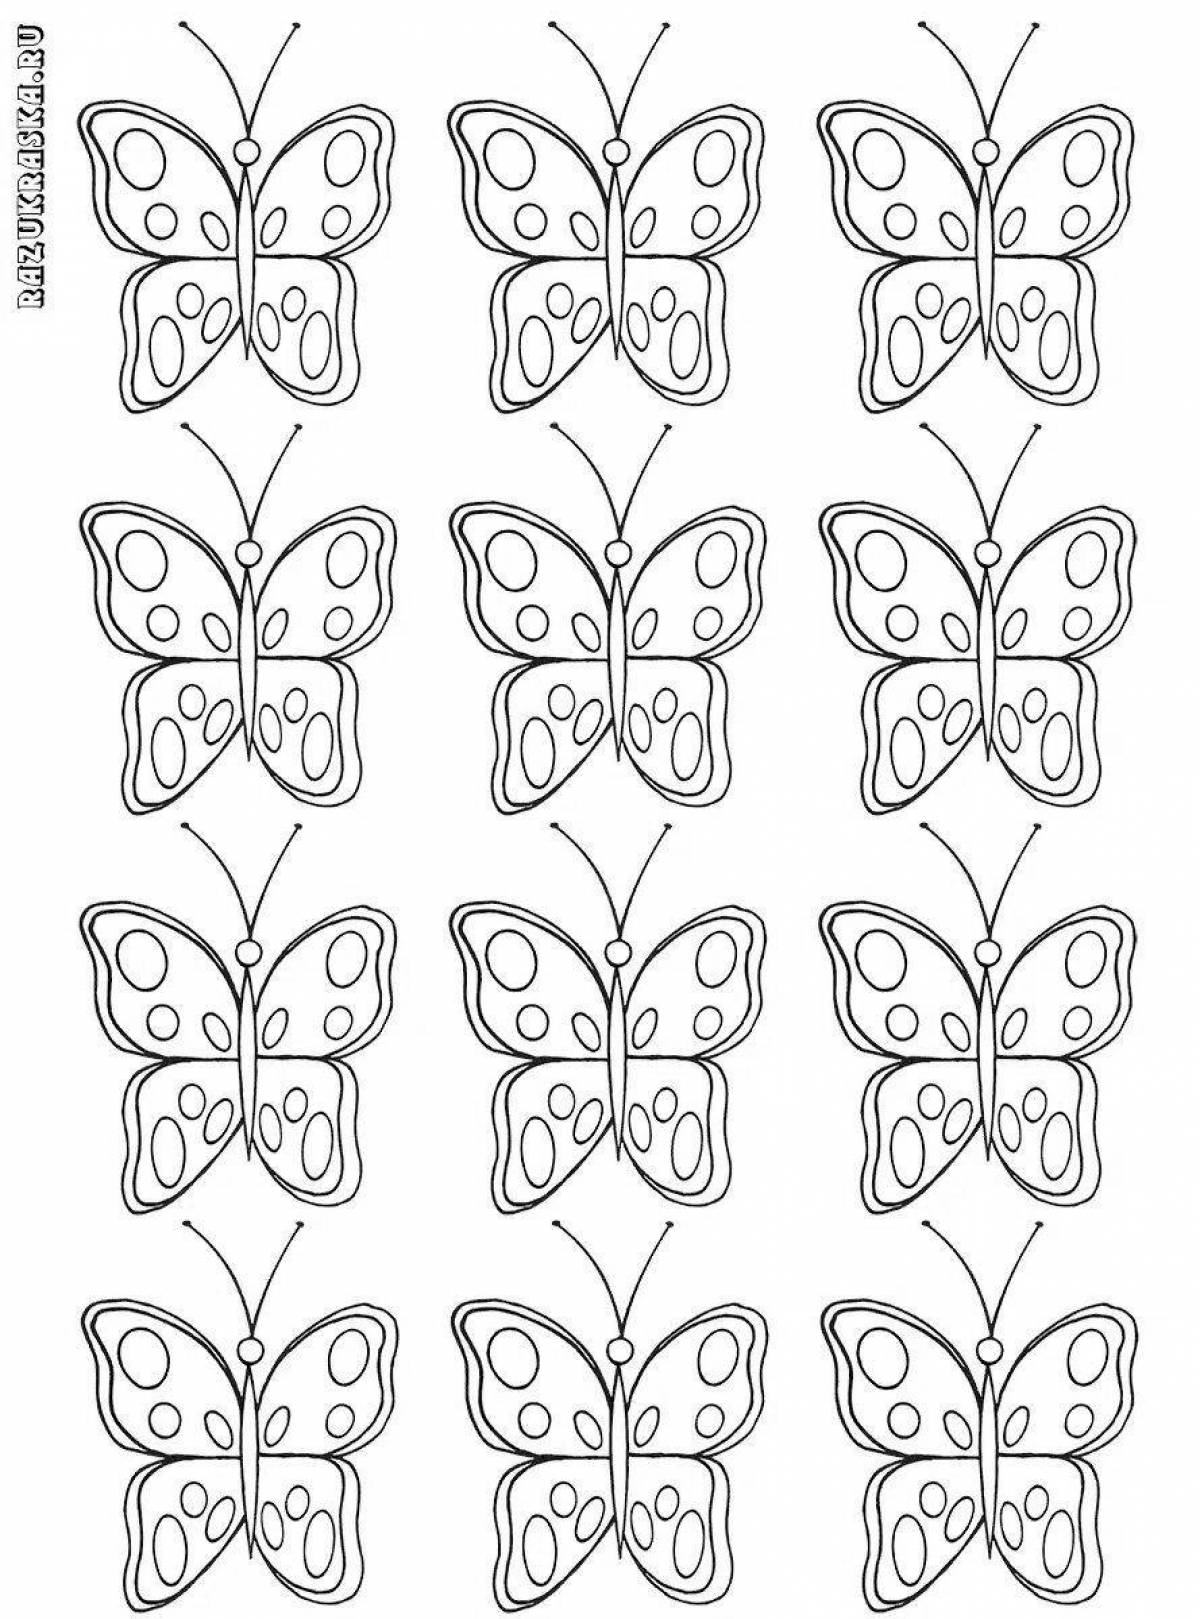 Coloring book shimmering little butterflies